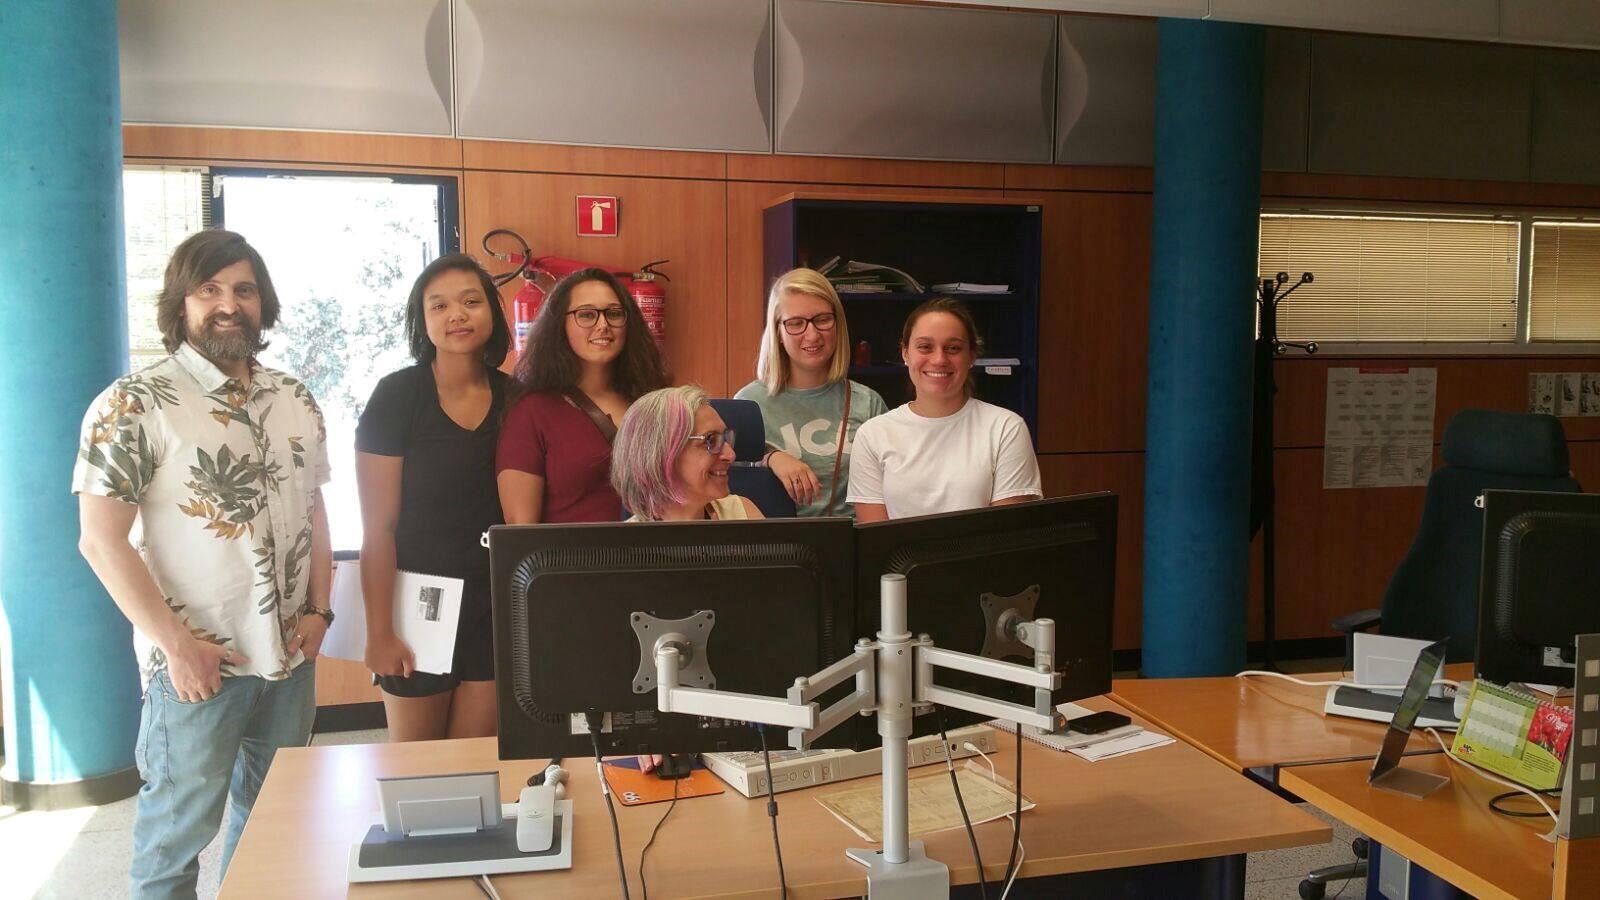 Amy Heng, Staci Fraley, Erin Dymon and Kaitlin Boyden at the 061 call center in Cordoba. 061 is Spain’s version of 911.